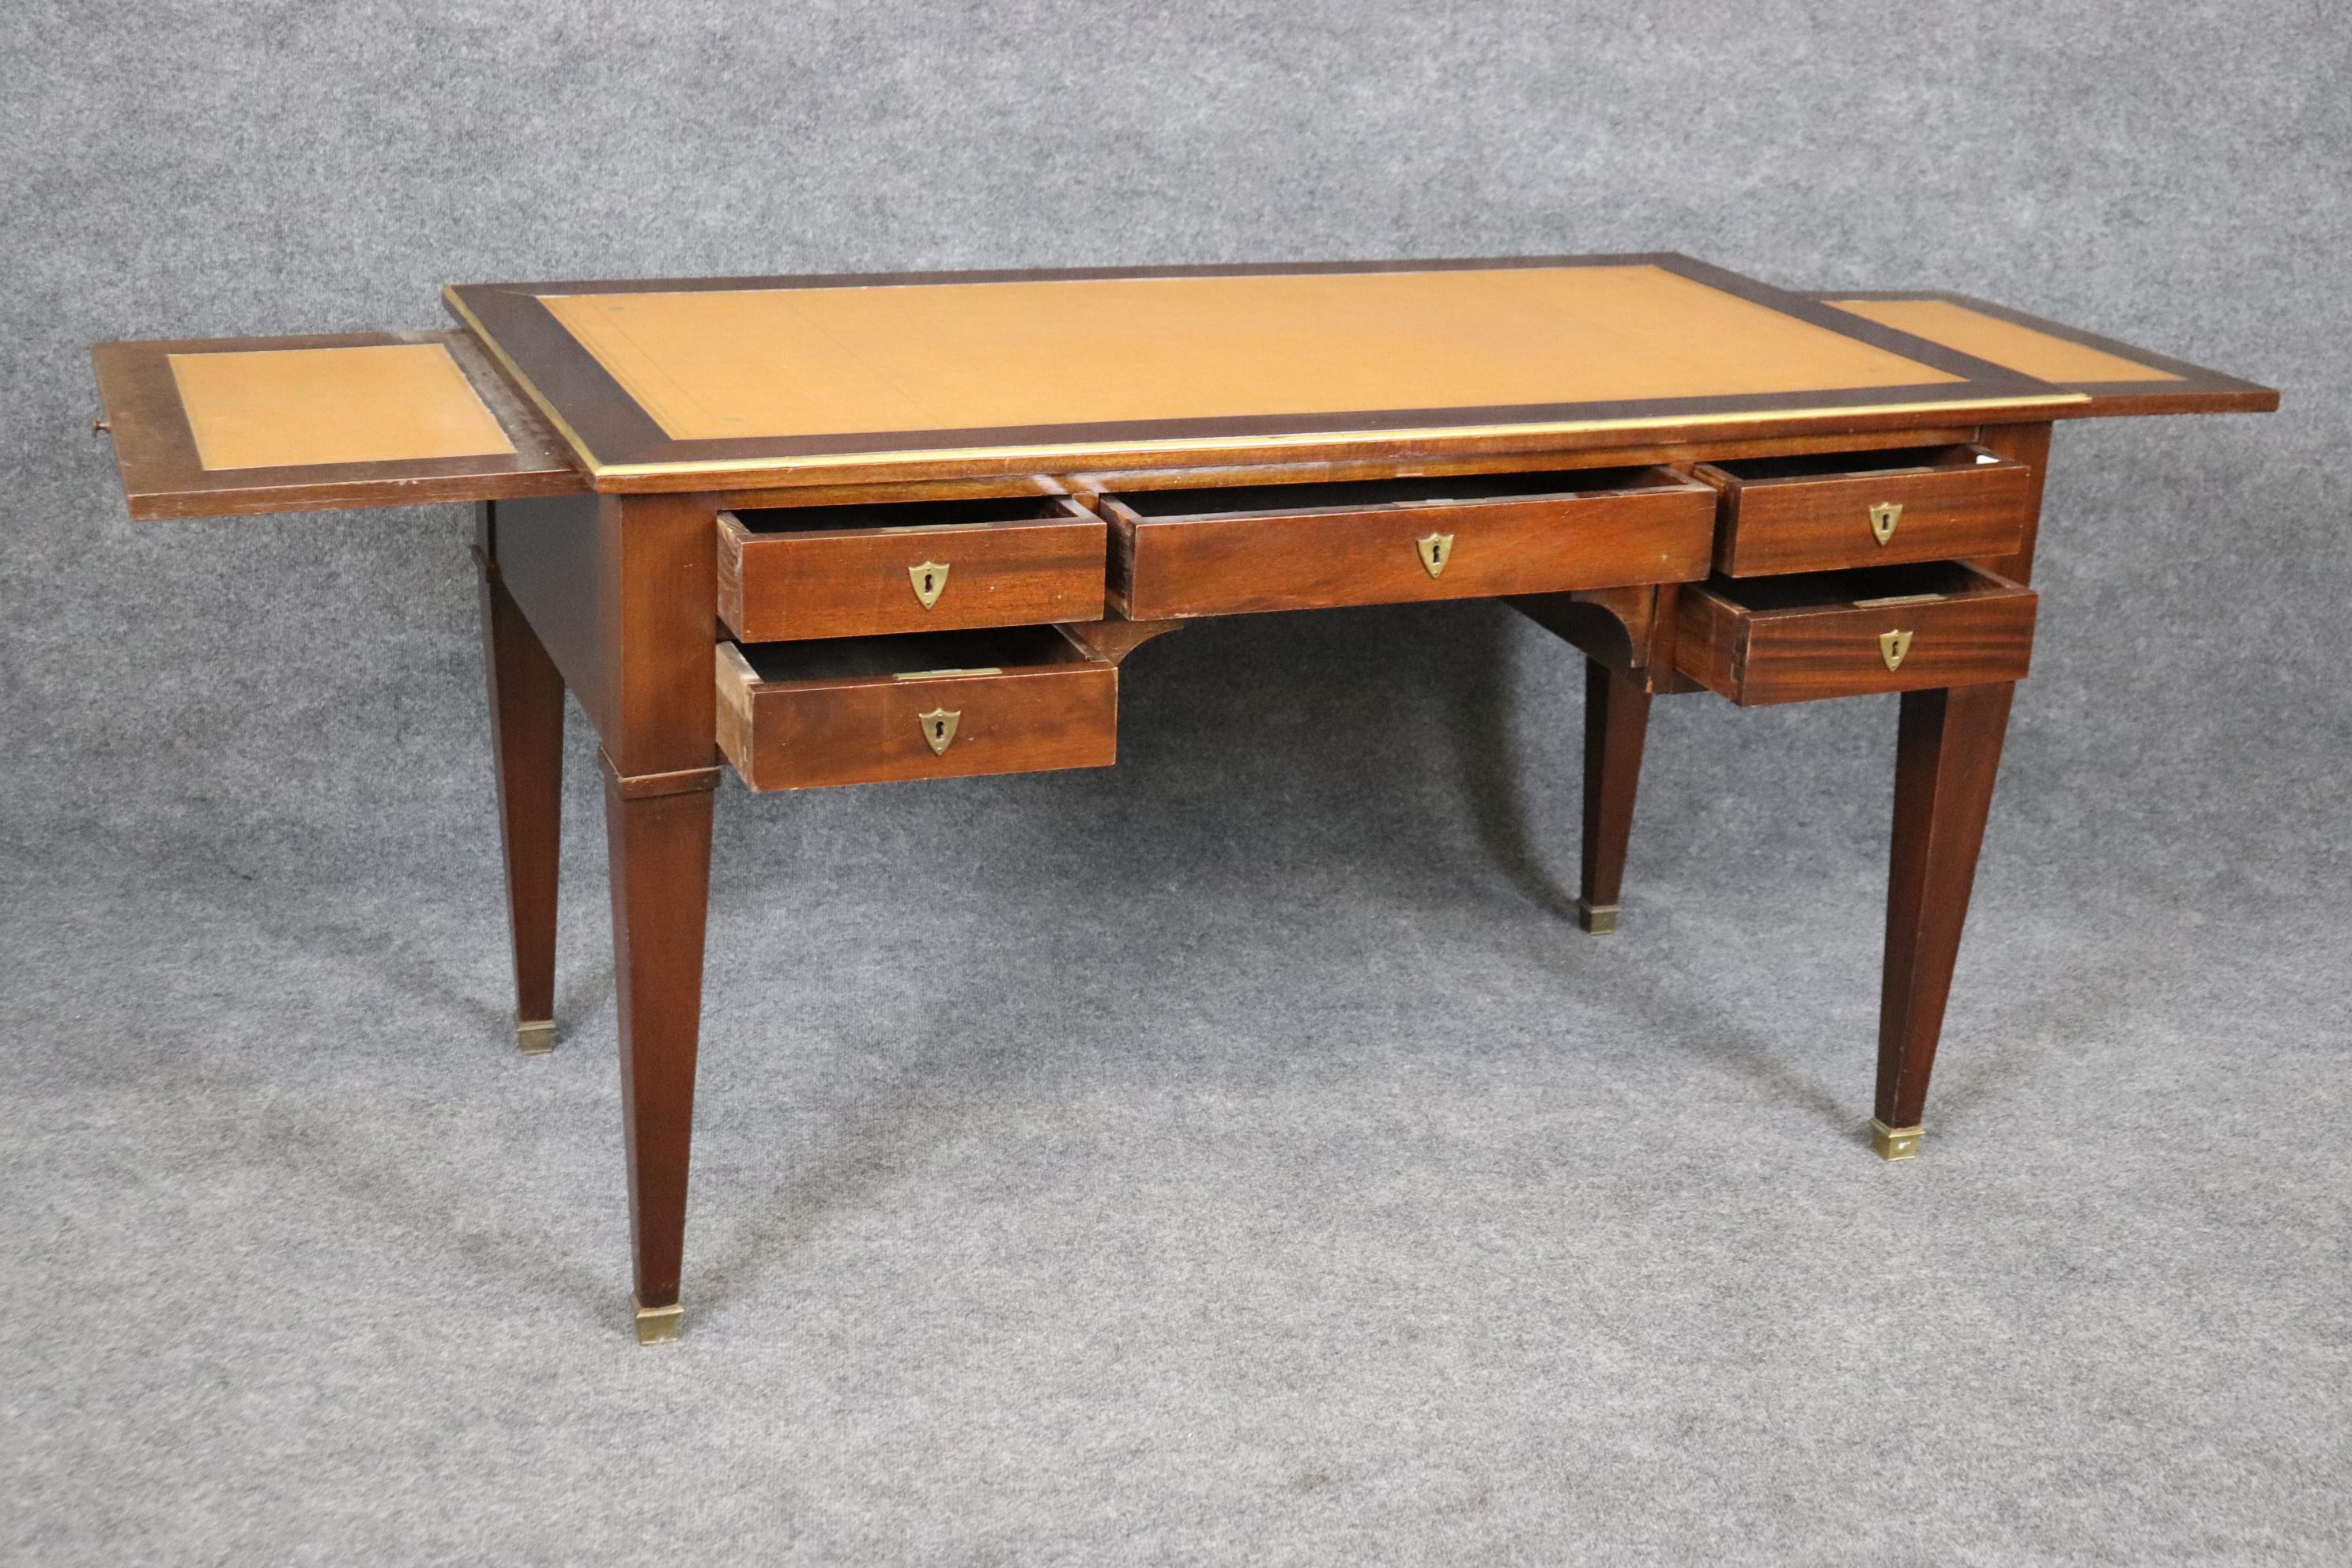 This is a very good French mahogany Directoire desk with bronze ormolu and restrained and simple design. The leather top is in good antique condition with some signs of age and use but nothing crazy or horrid. The desk is a faux partners desk with